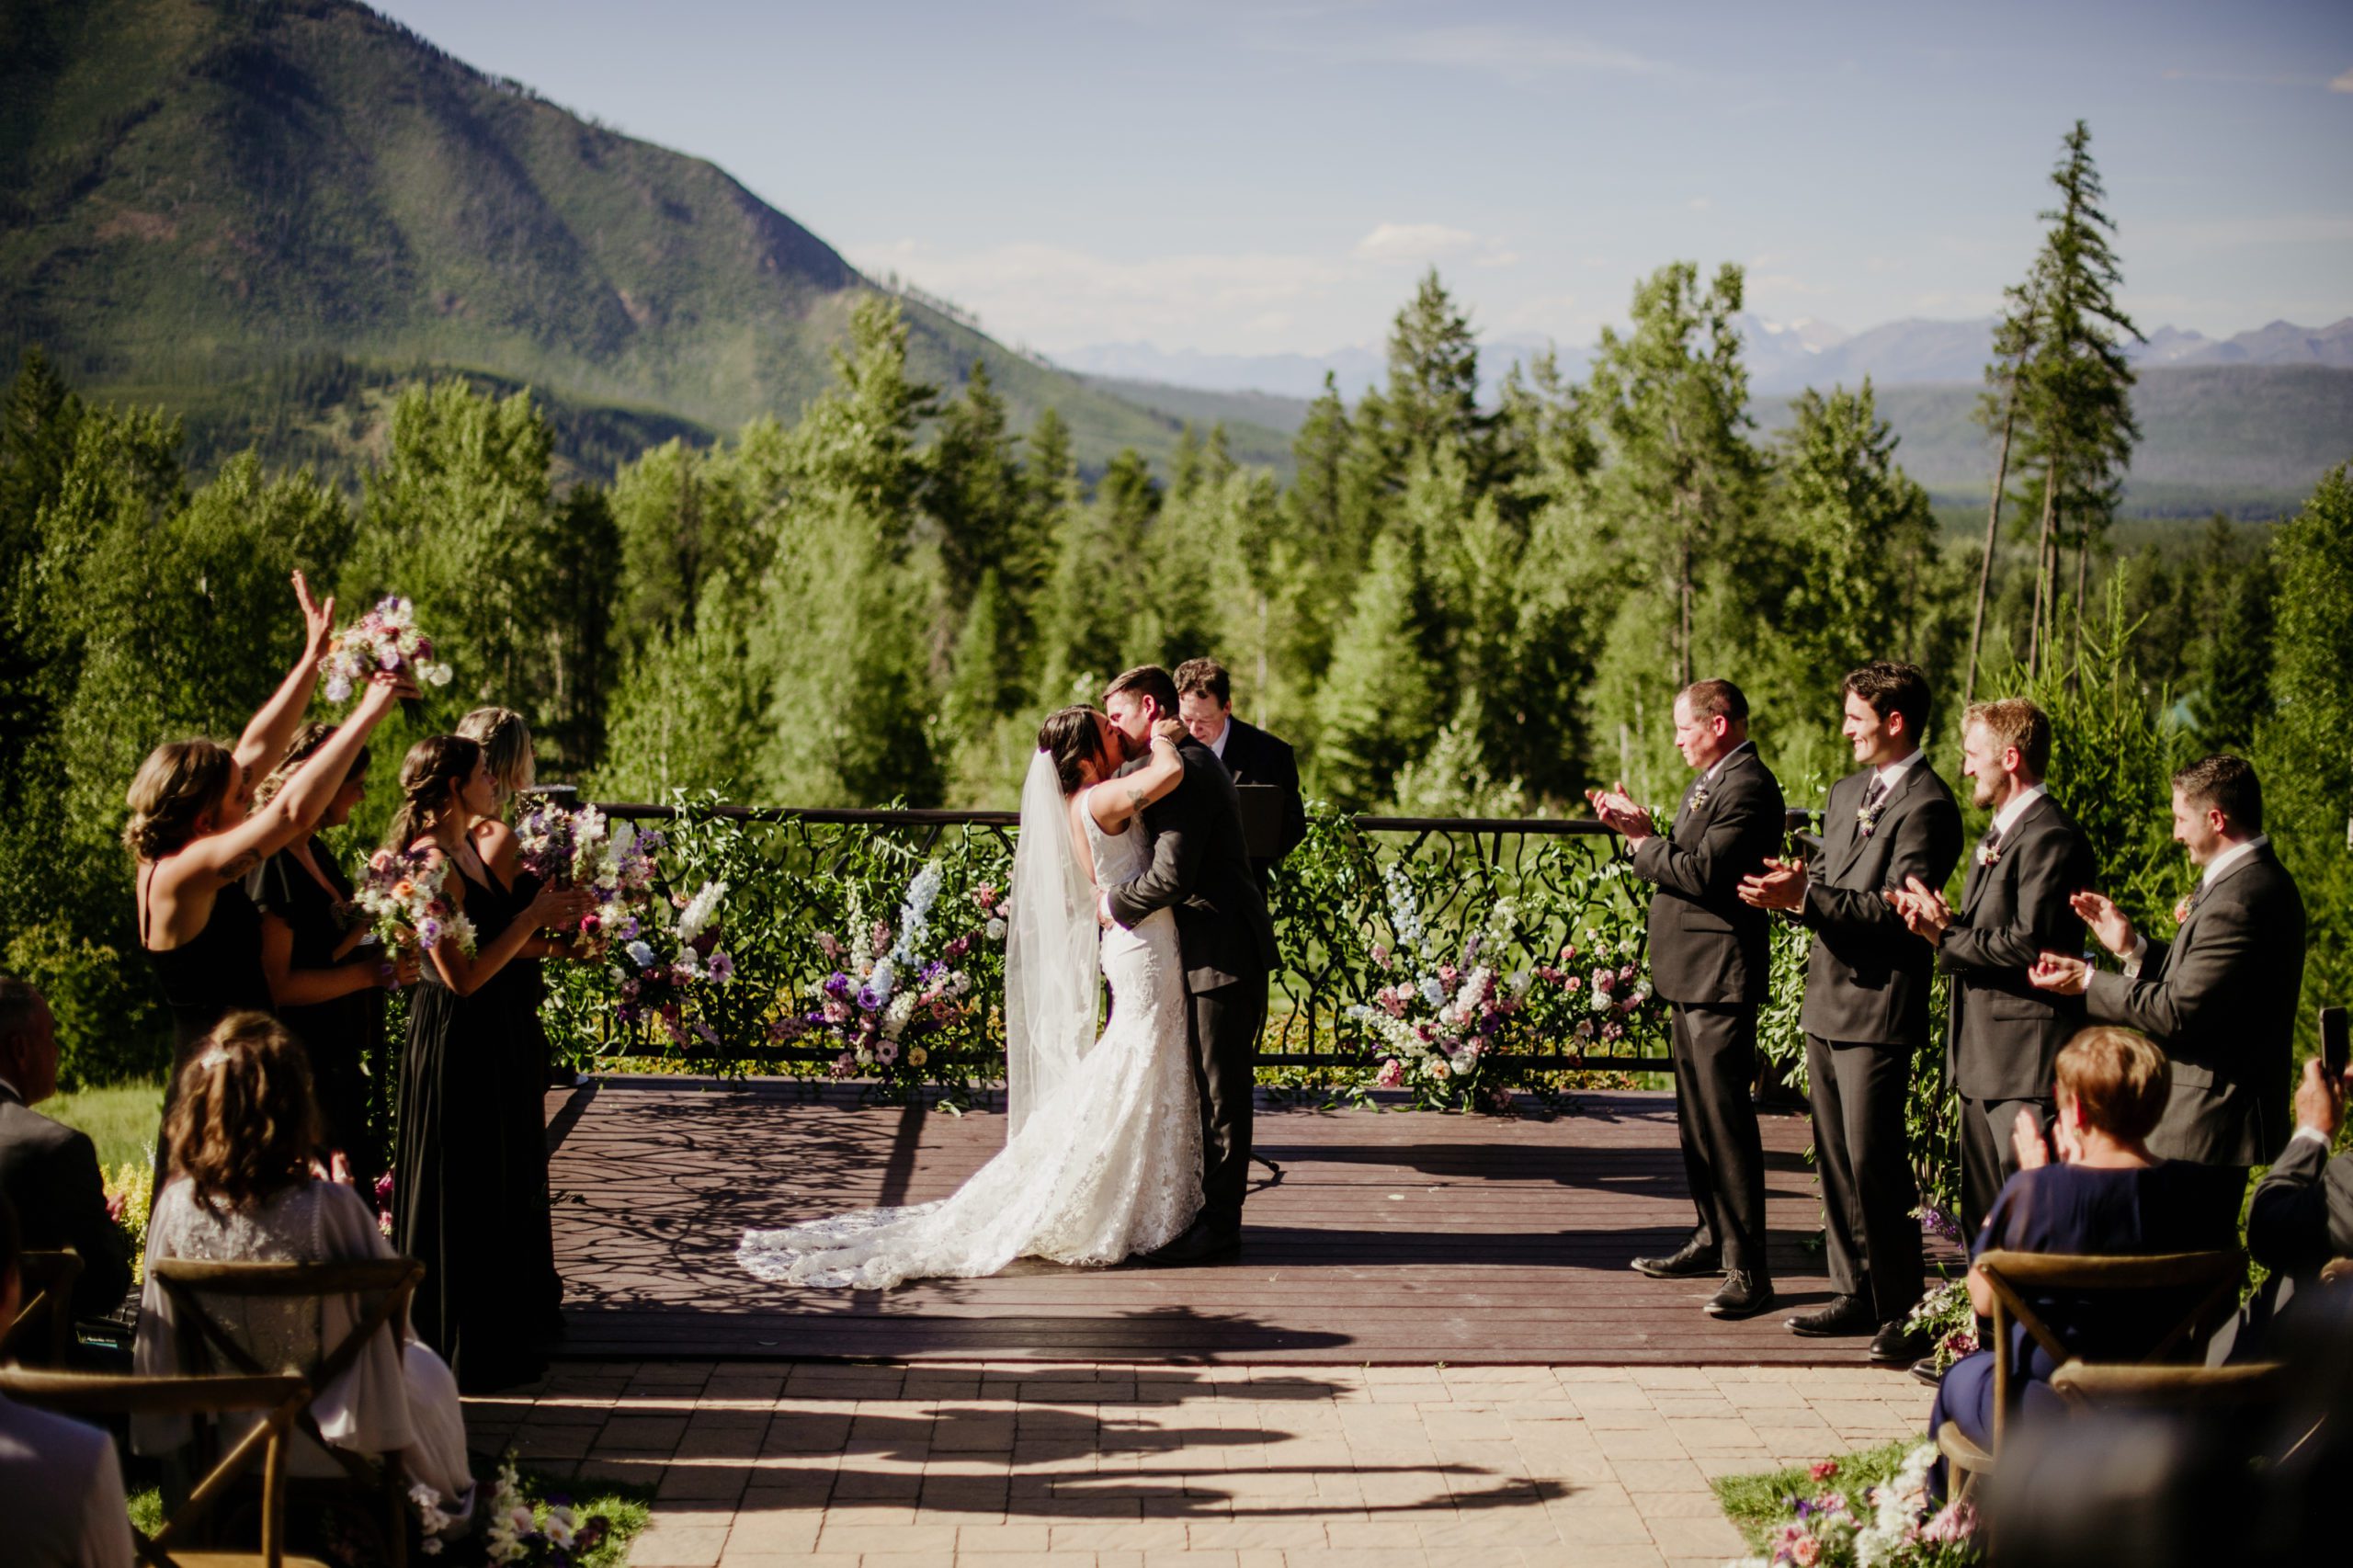 A 2 day glacier national park wedding and adventure session gives you the full experience! Glacier Outdoor Center is the perfect wedding venue if you want to explore Glacier!